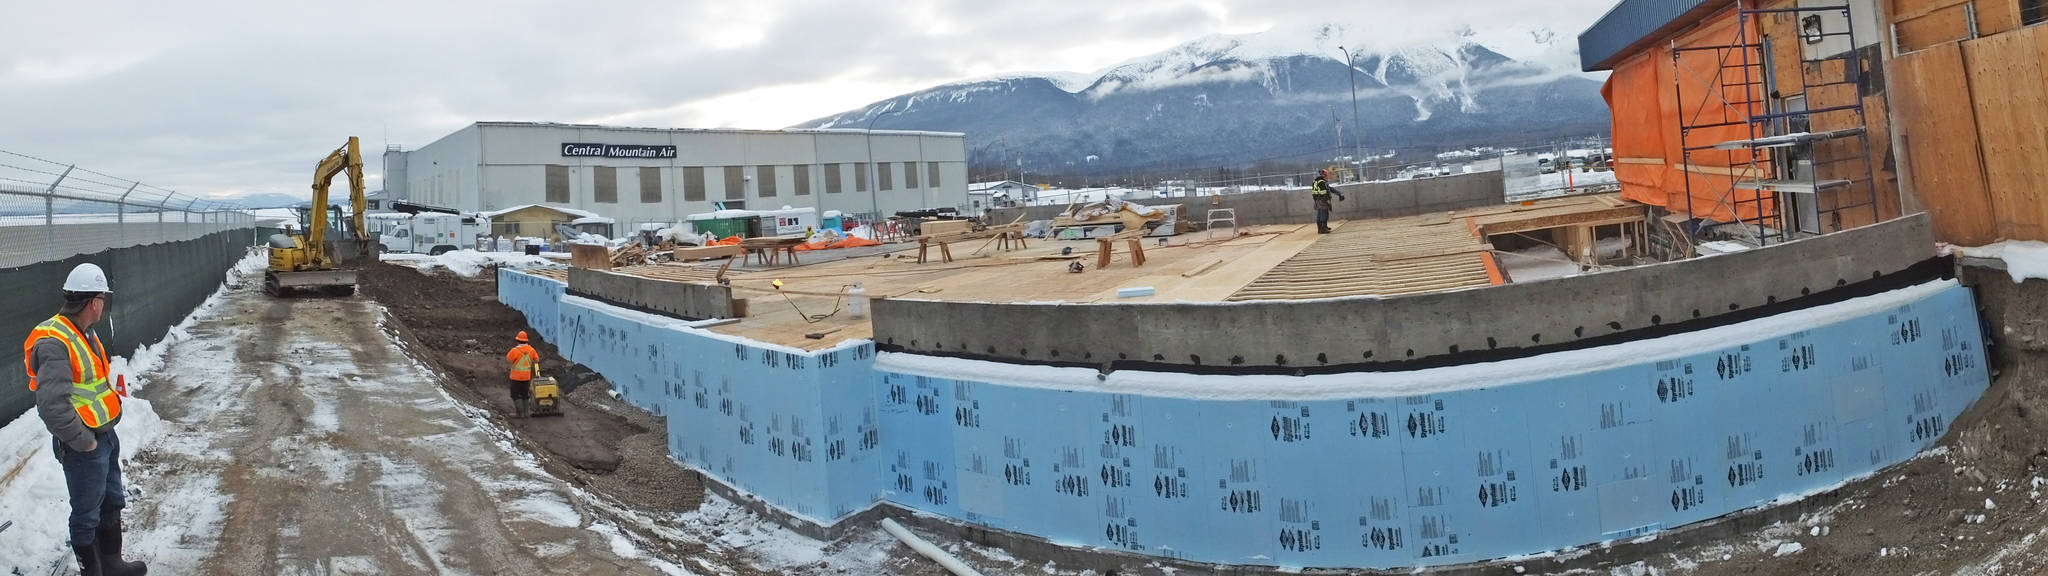 9888141_web1_Smithers-Airport-construction-wide-shot